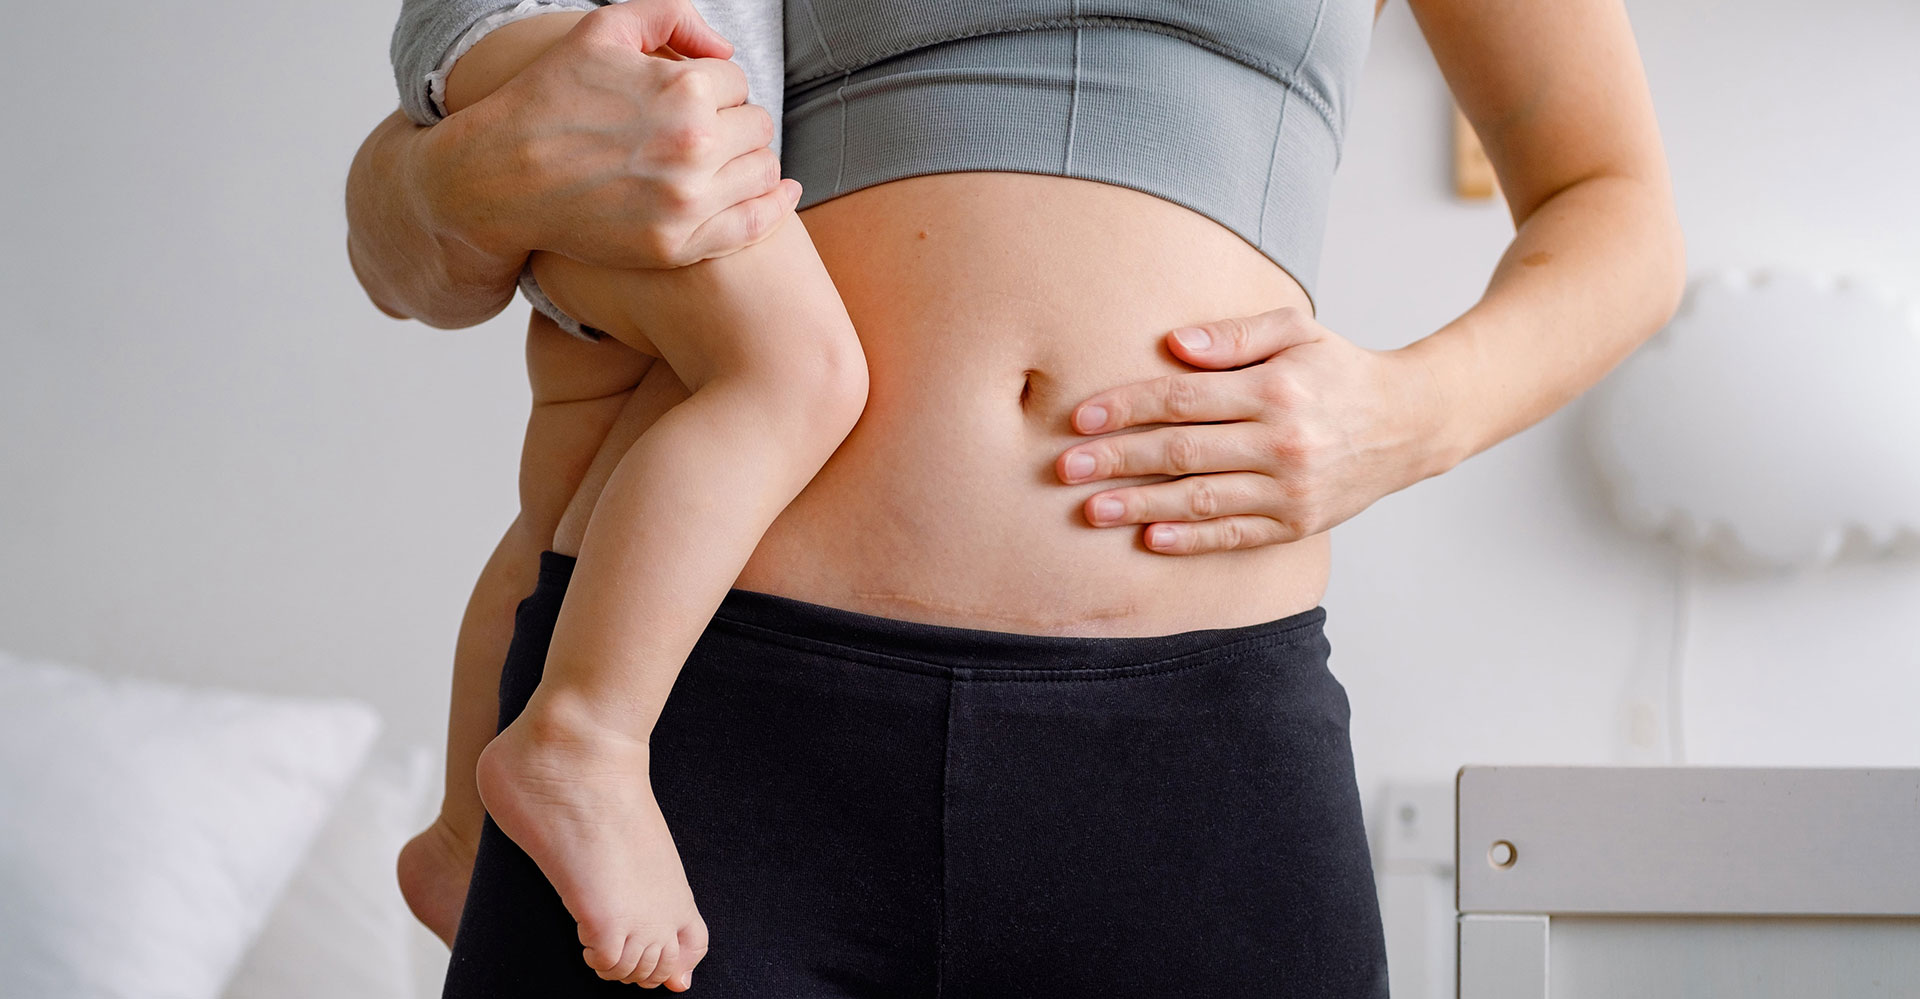 The Best C-Section Advice for Postpartum Healing - Get Moving Mama